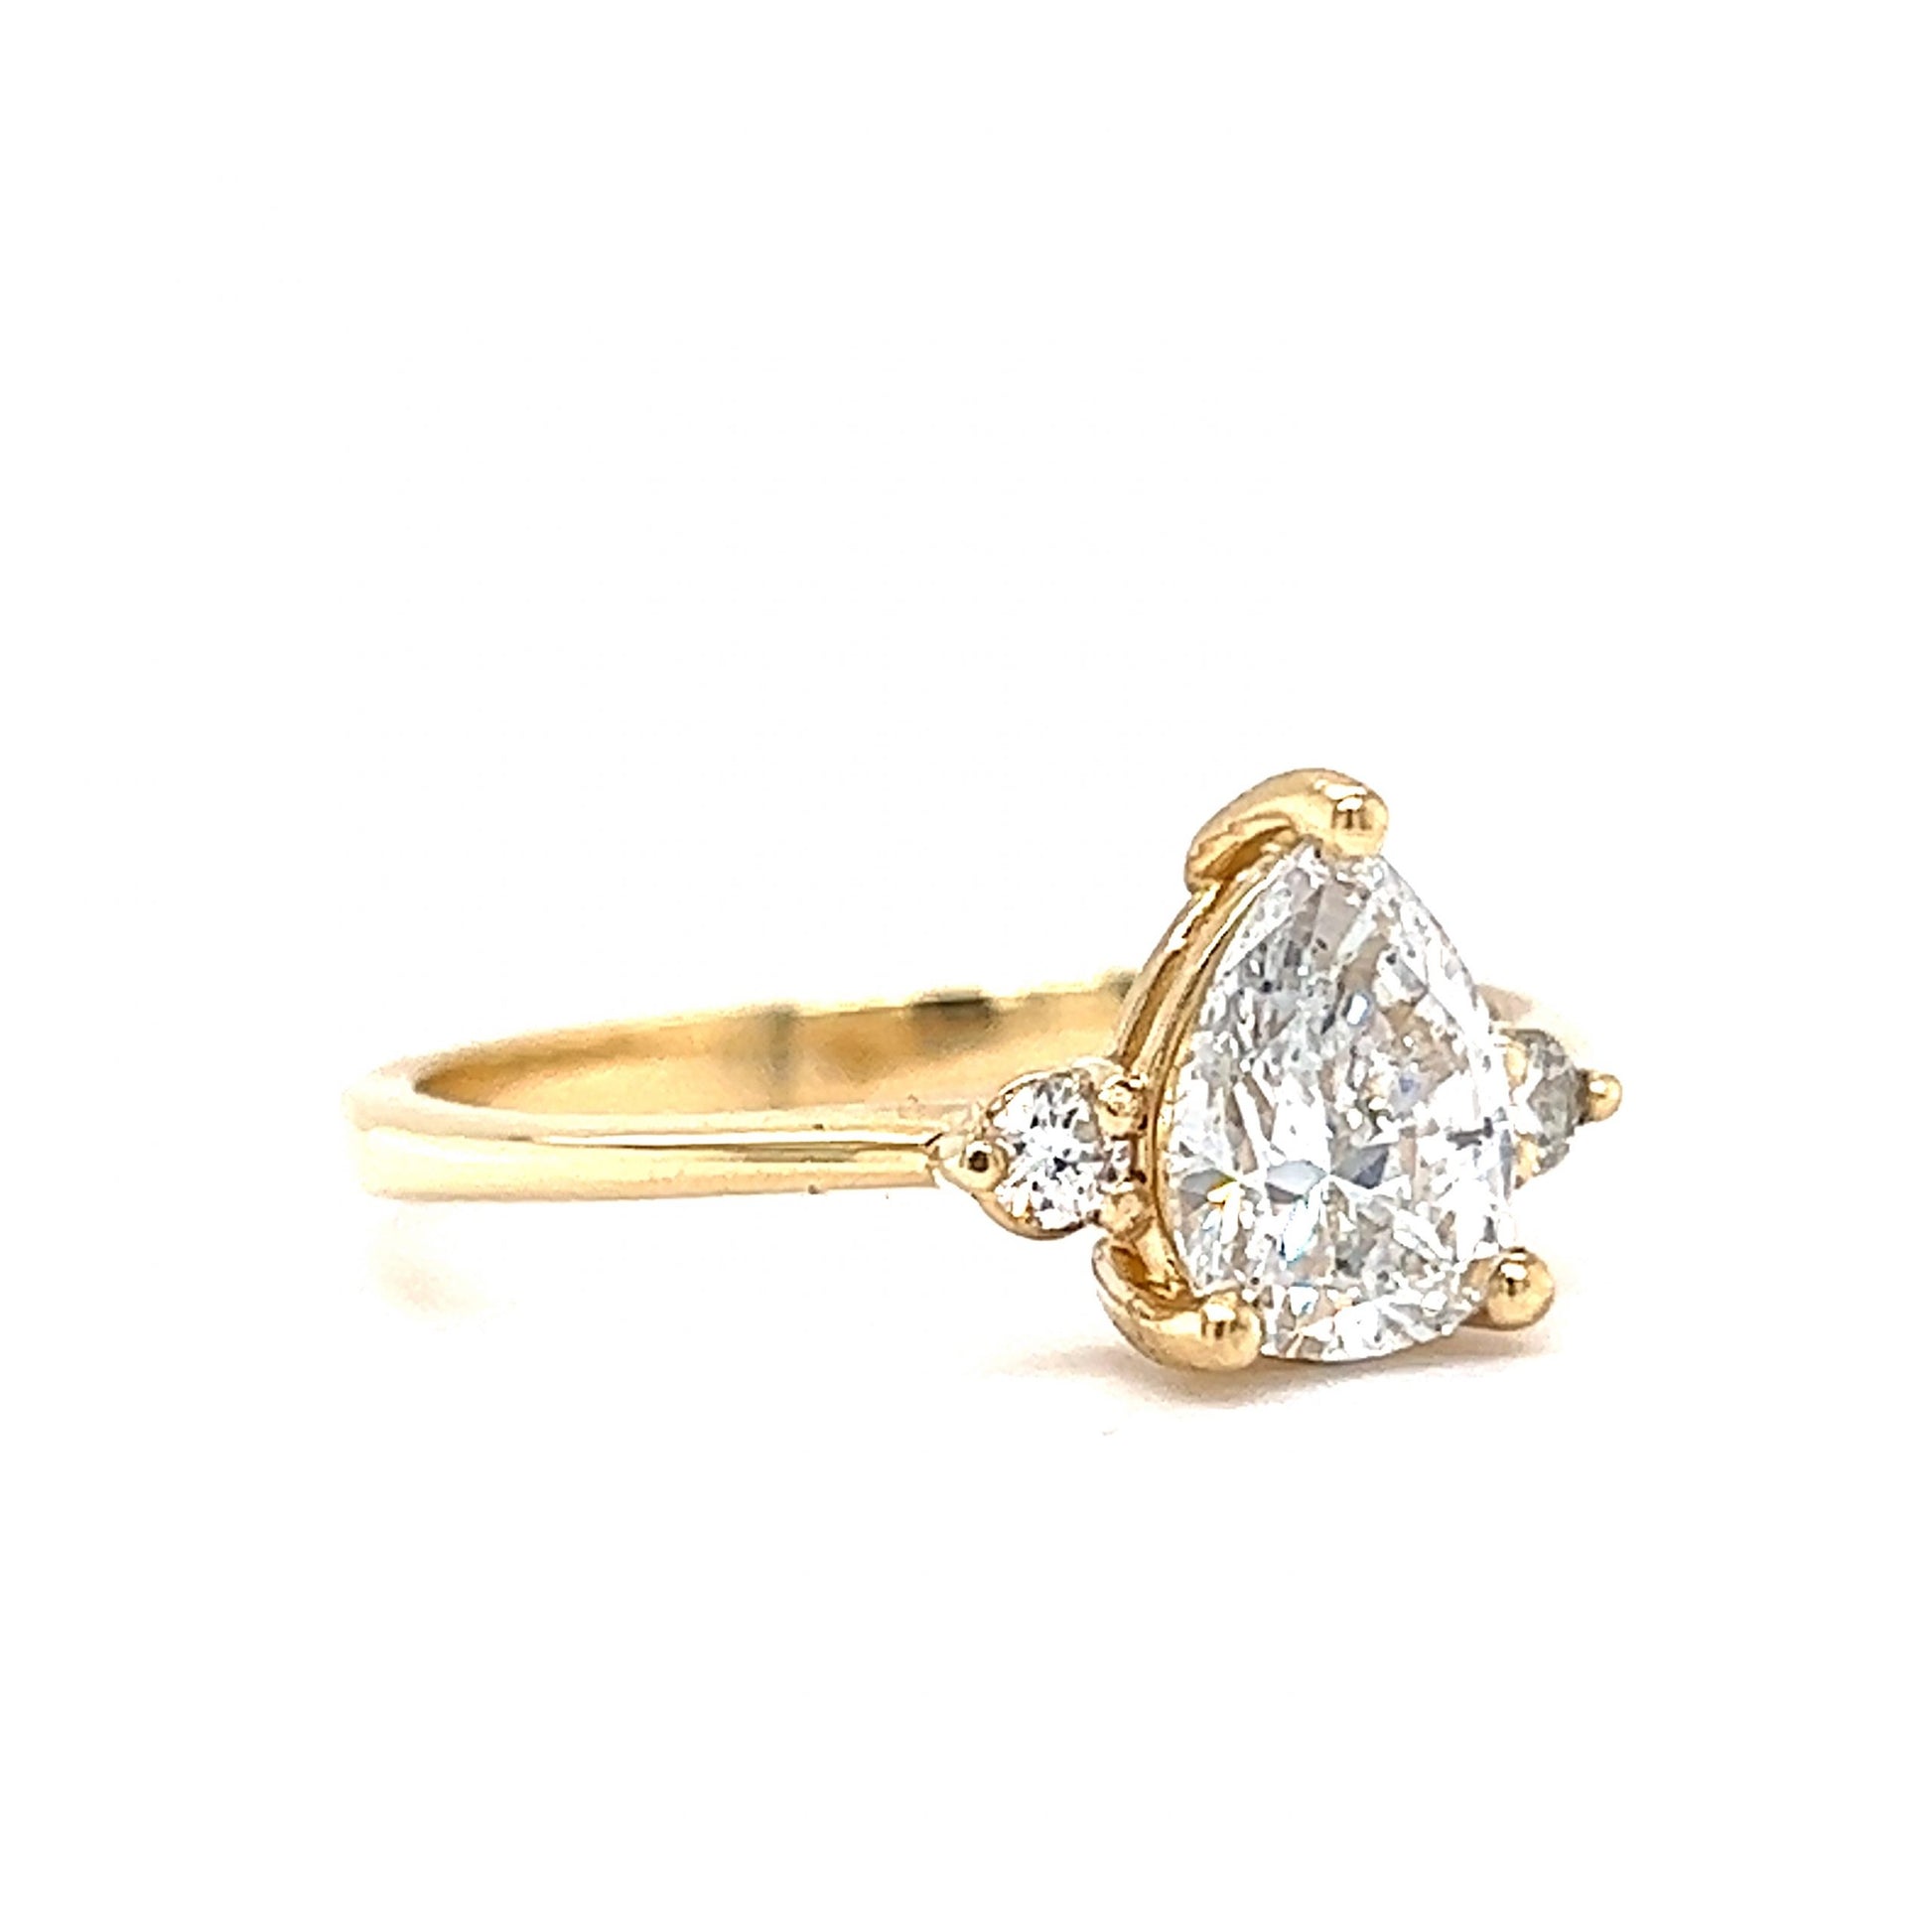 Colorless 1.01 Pear Cut Diamond Engagement Ring in 14k Gold